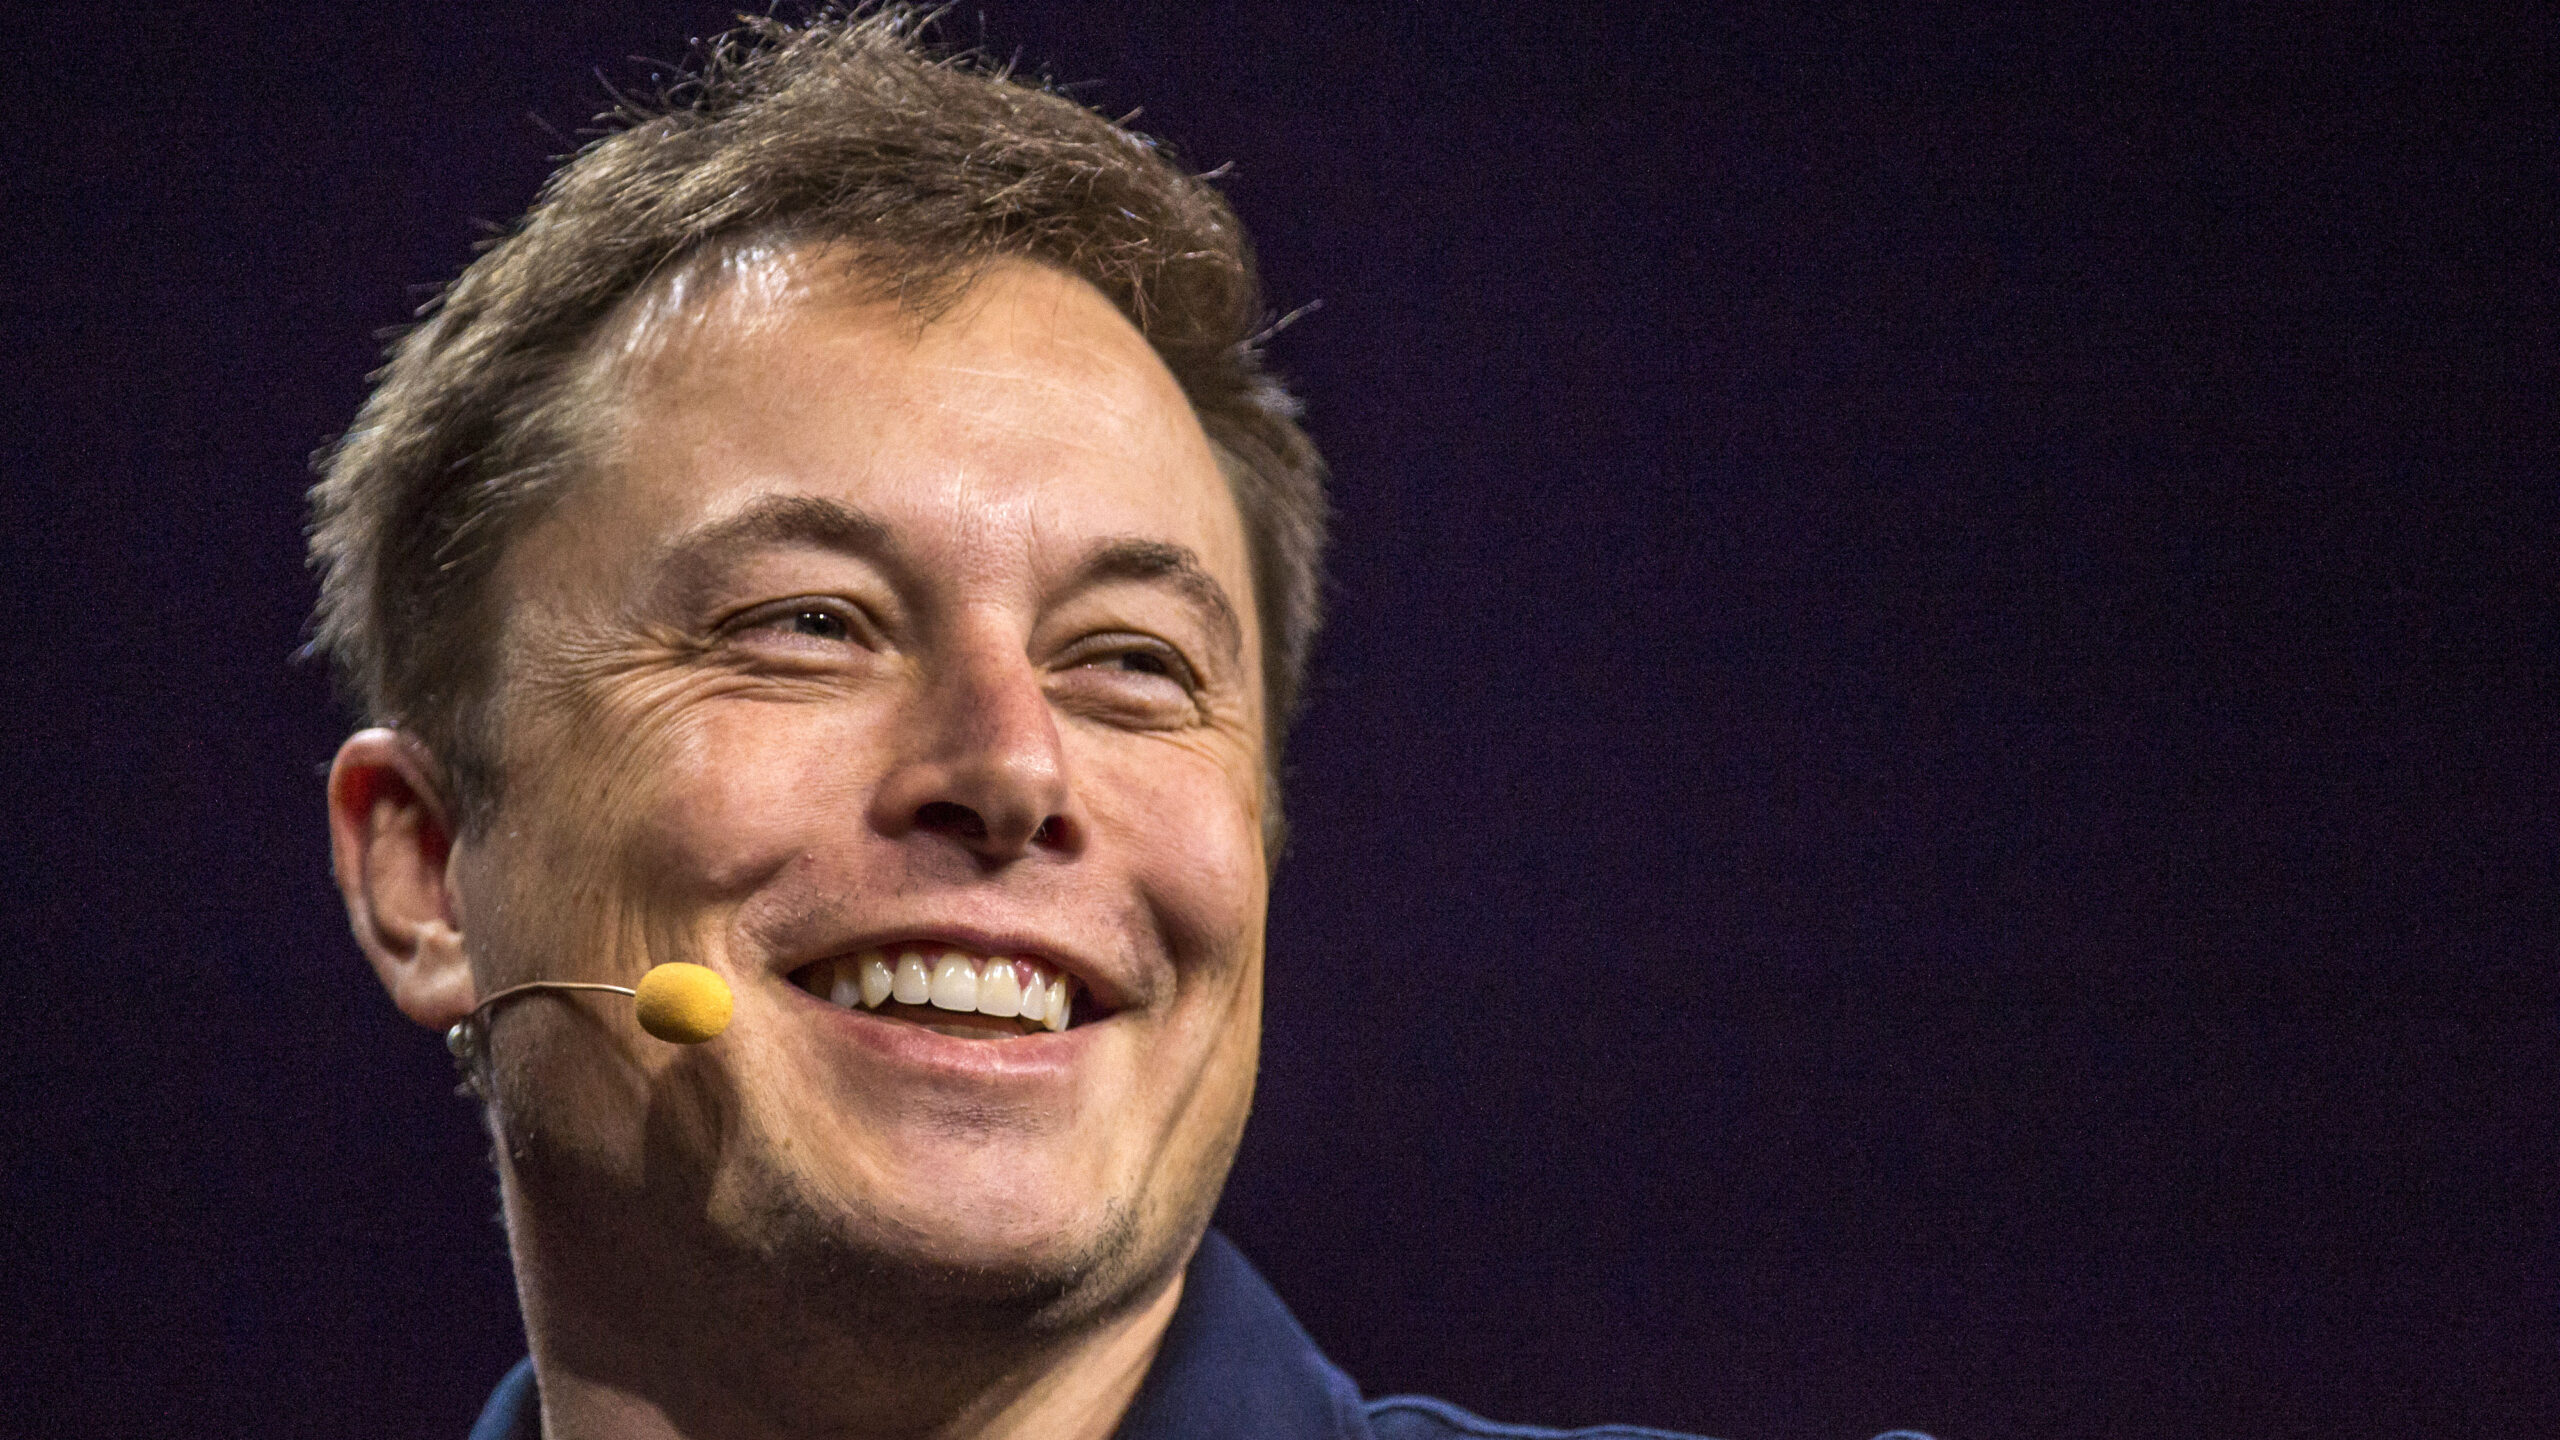 Elon Musk Hammers Woke Politician For Trans Remarks: ‘Every Child Goes Through An Identity Crisis’